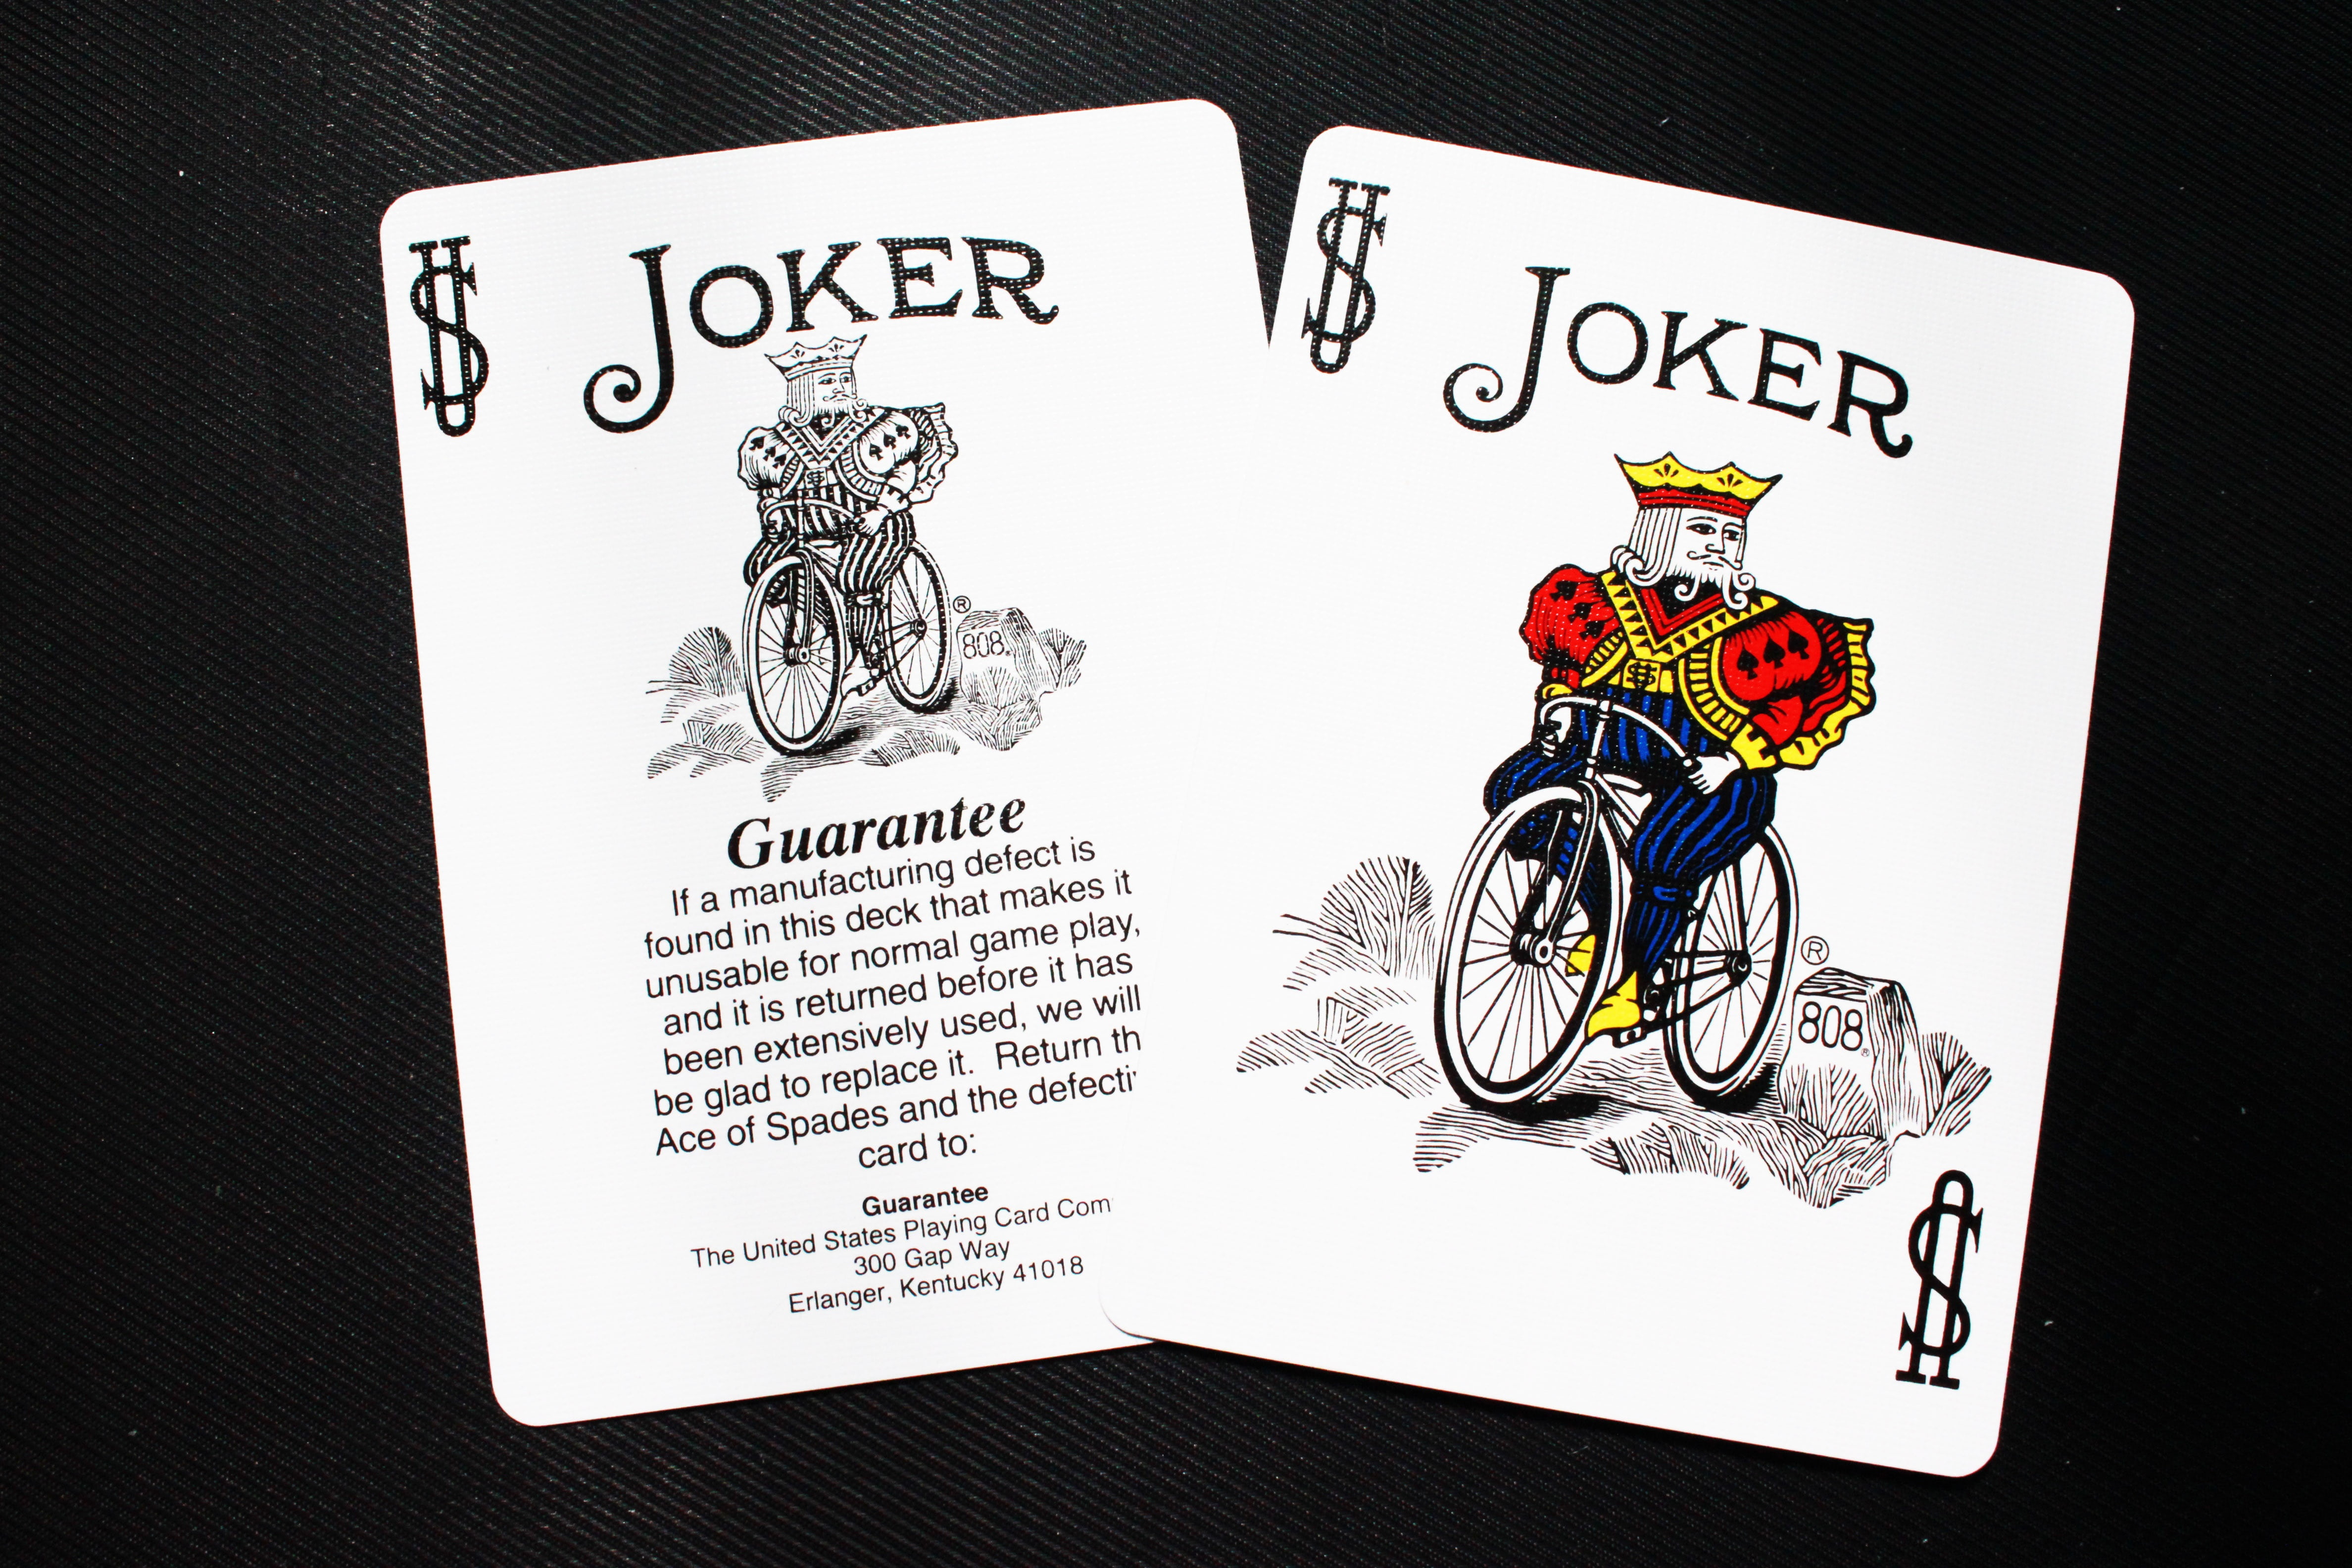 two Joker playing cards, deck, bicycle, magic cards, text, close-up